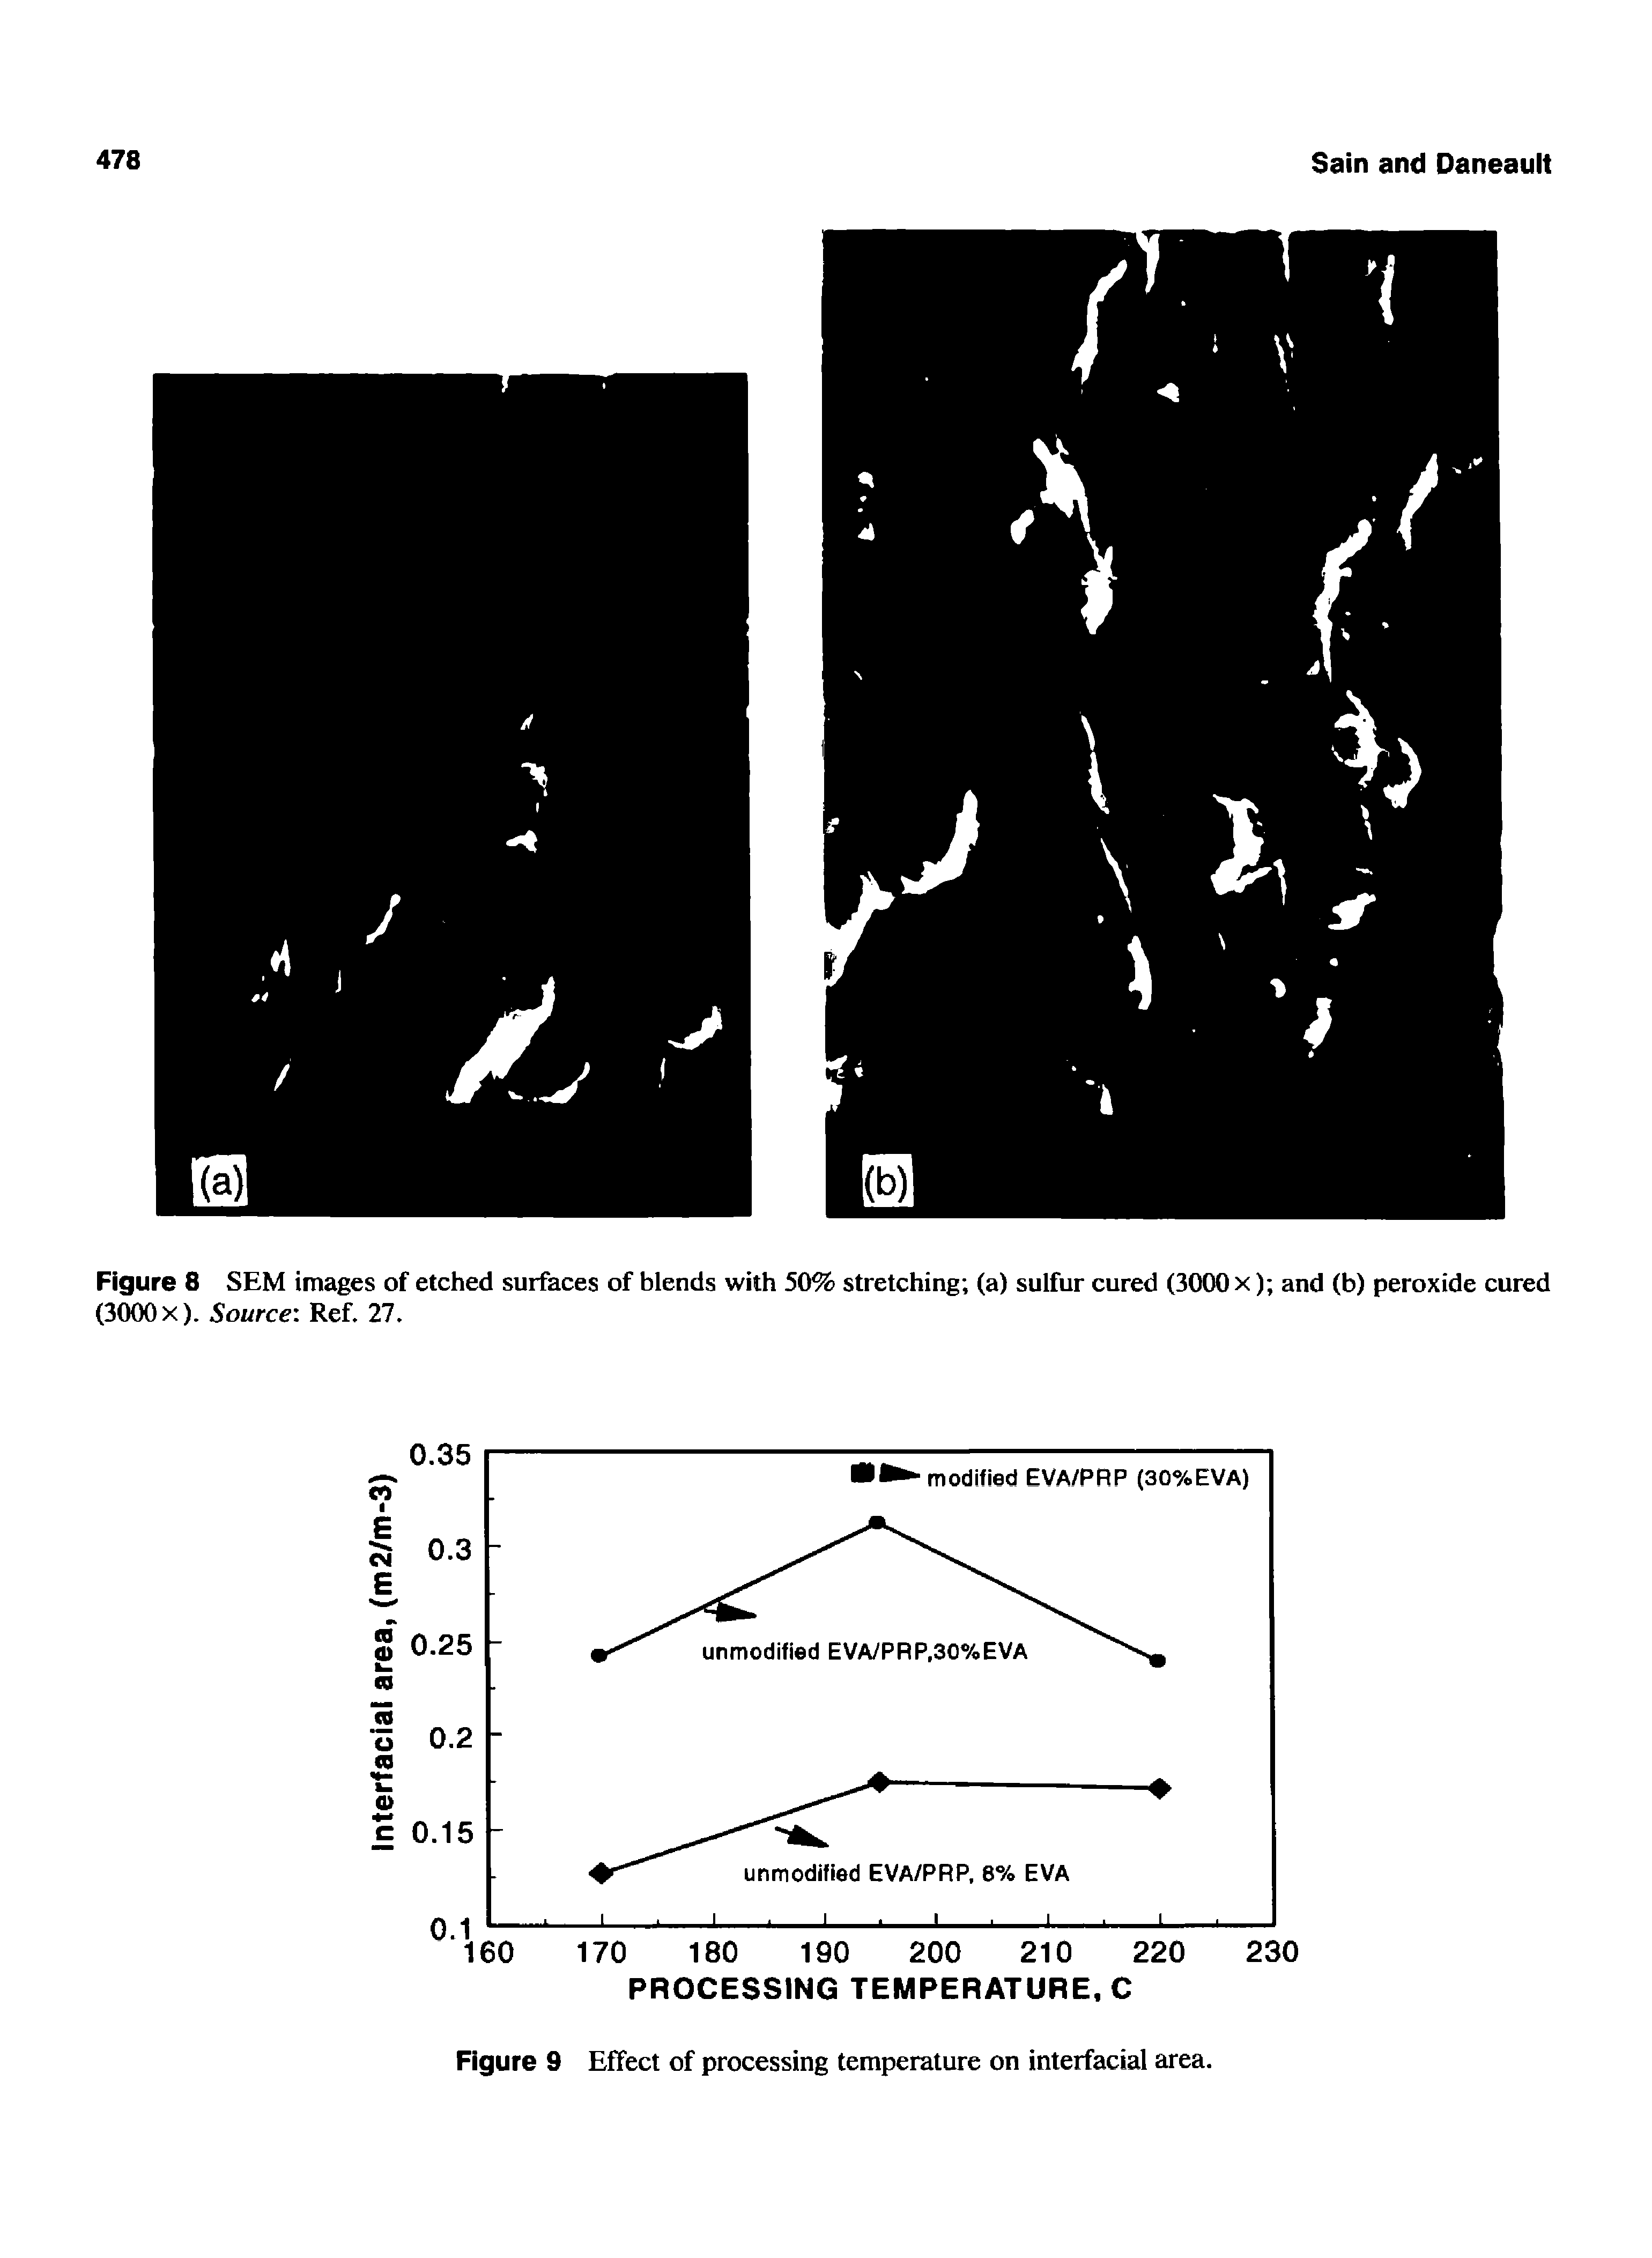 Figure 8 SEM images of etched surfaces of blends with 50% stretching (a) sulfur cured (3000 x) and (b) peroxide cured (3000 X). Source Ref. 27.